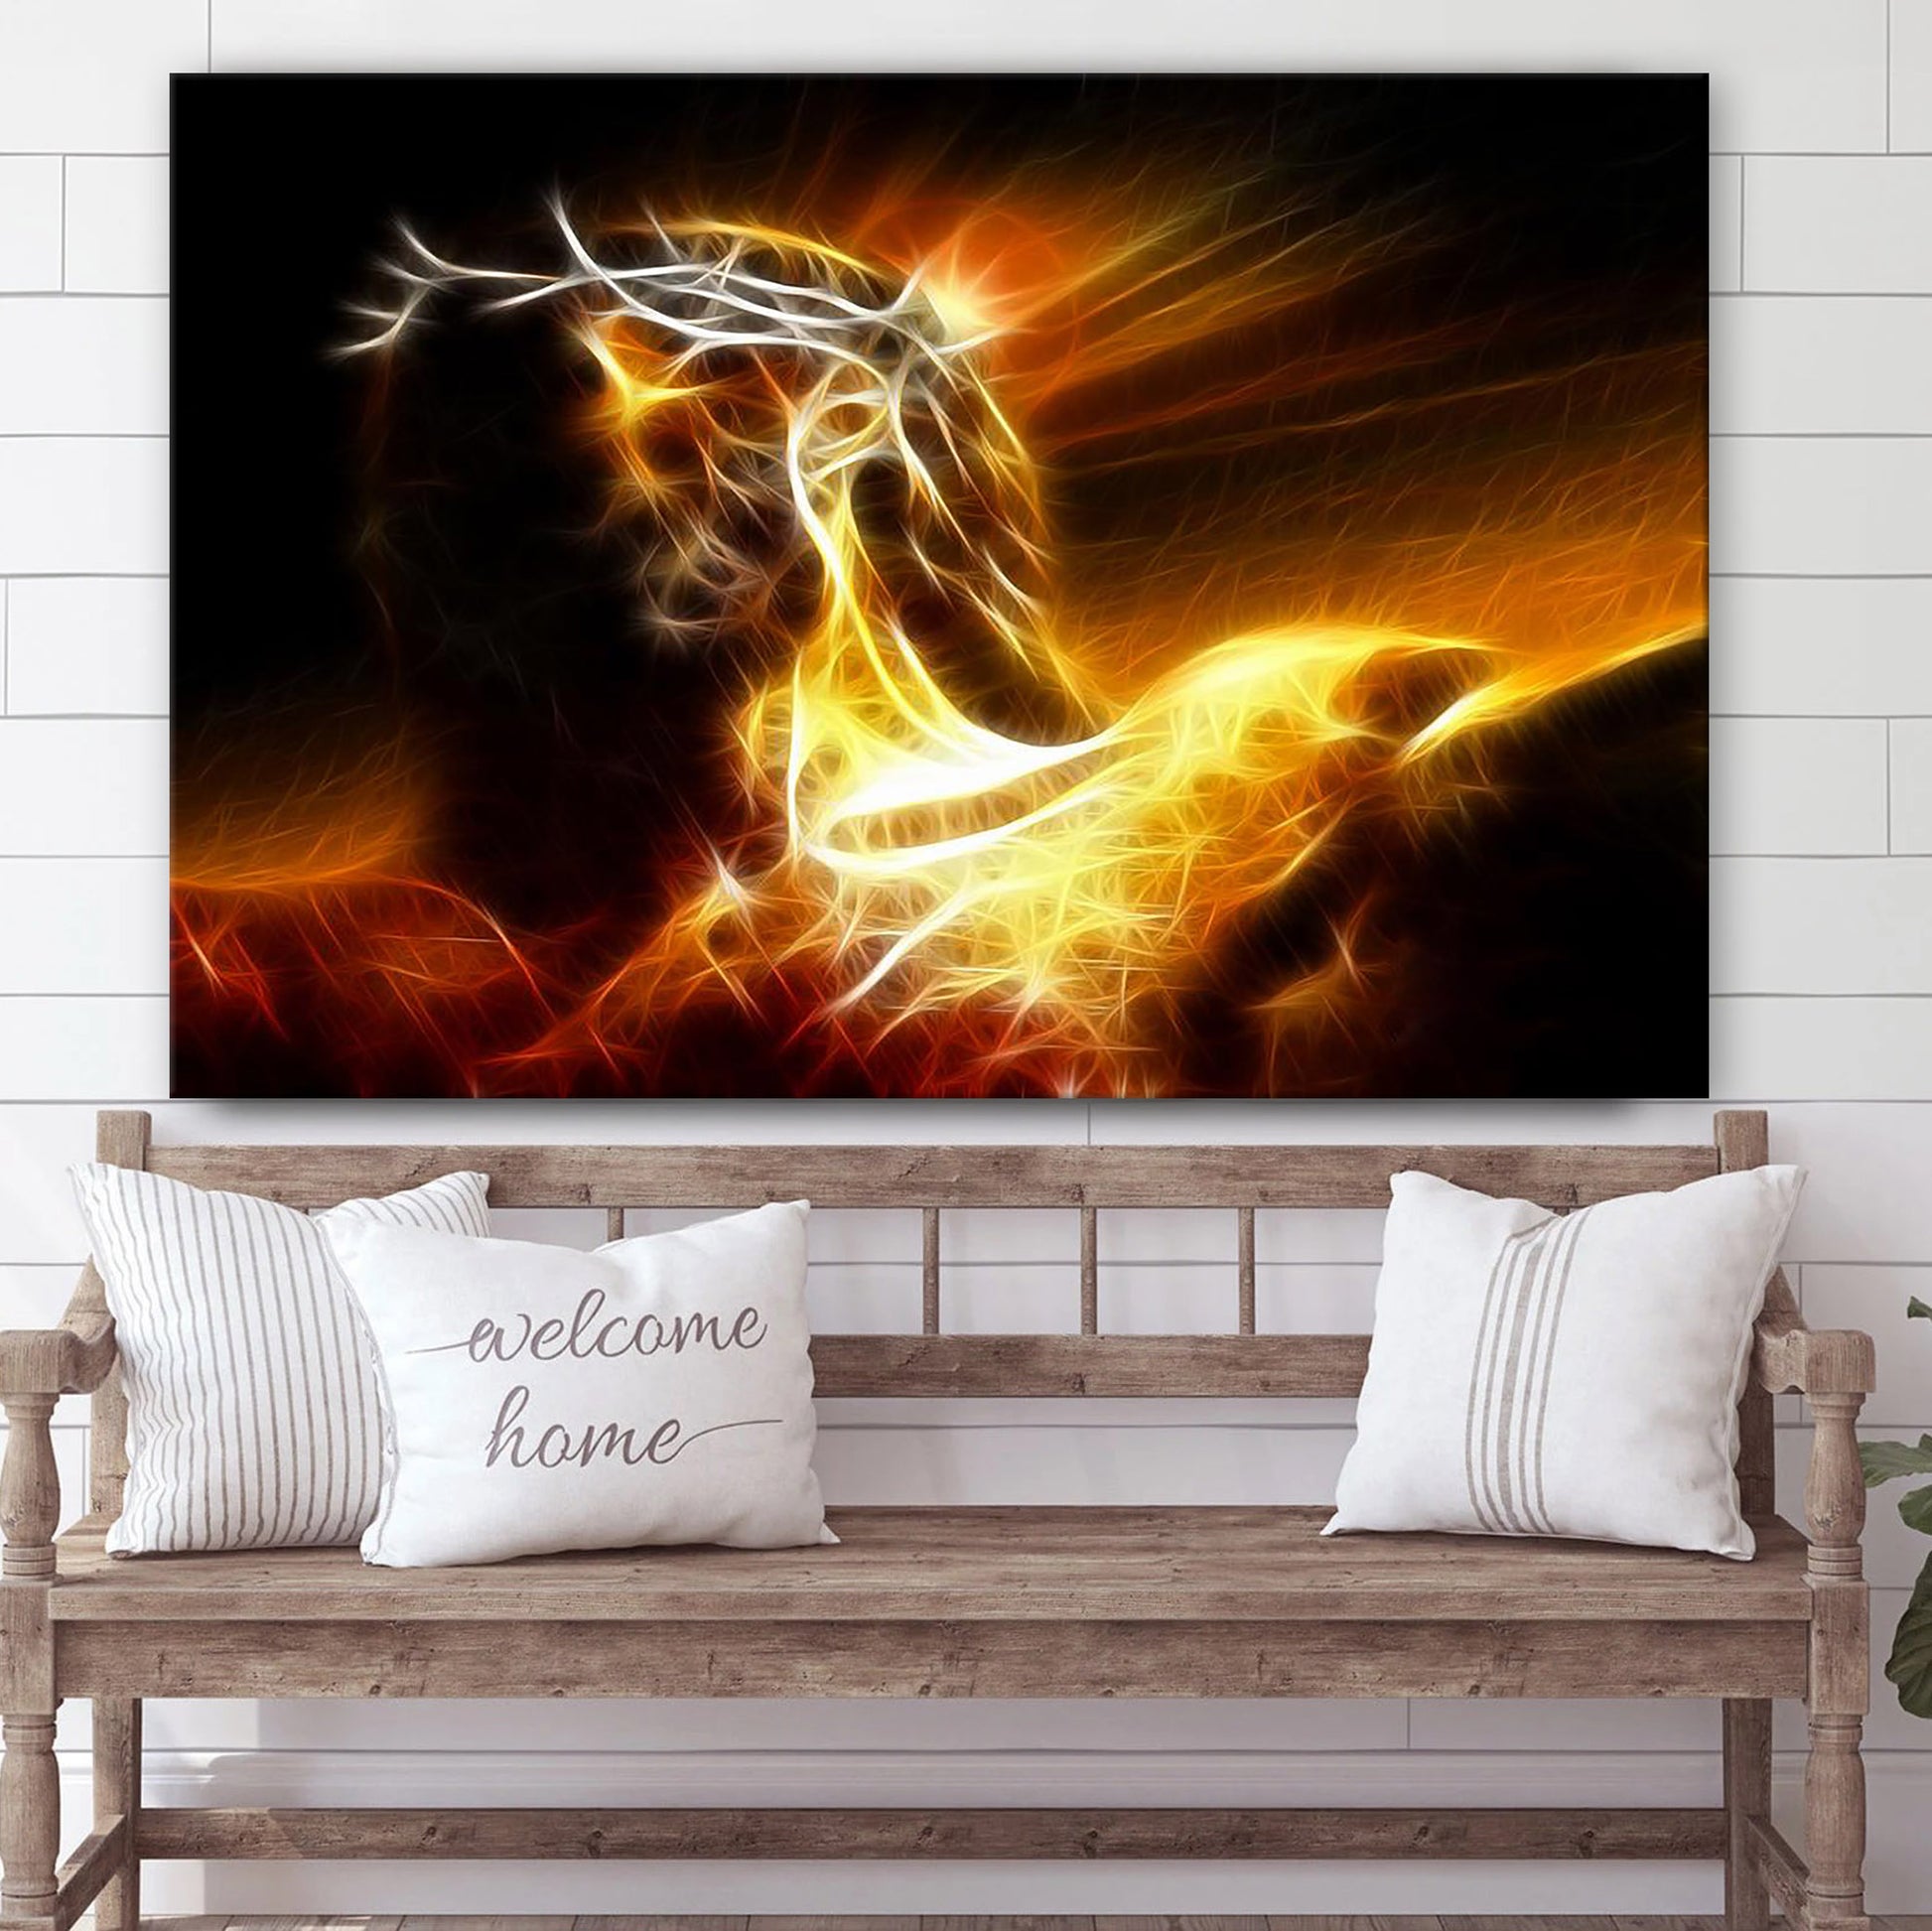 Tragic Jesus Crucifixion Canvas Pictures - Easter Wall Art - Christian Easter Home Decor